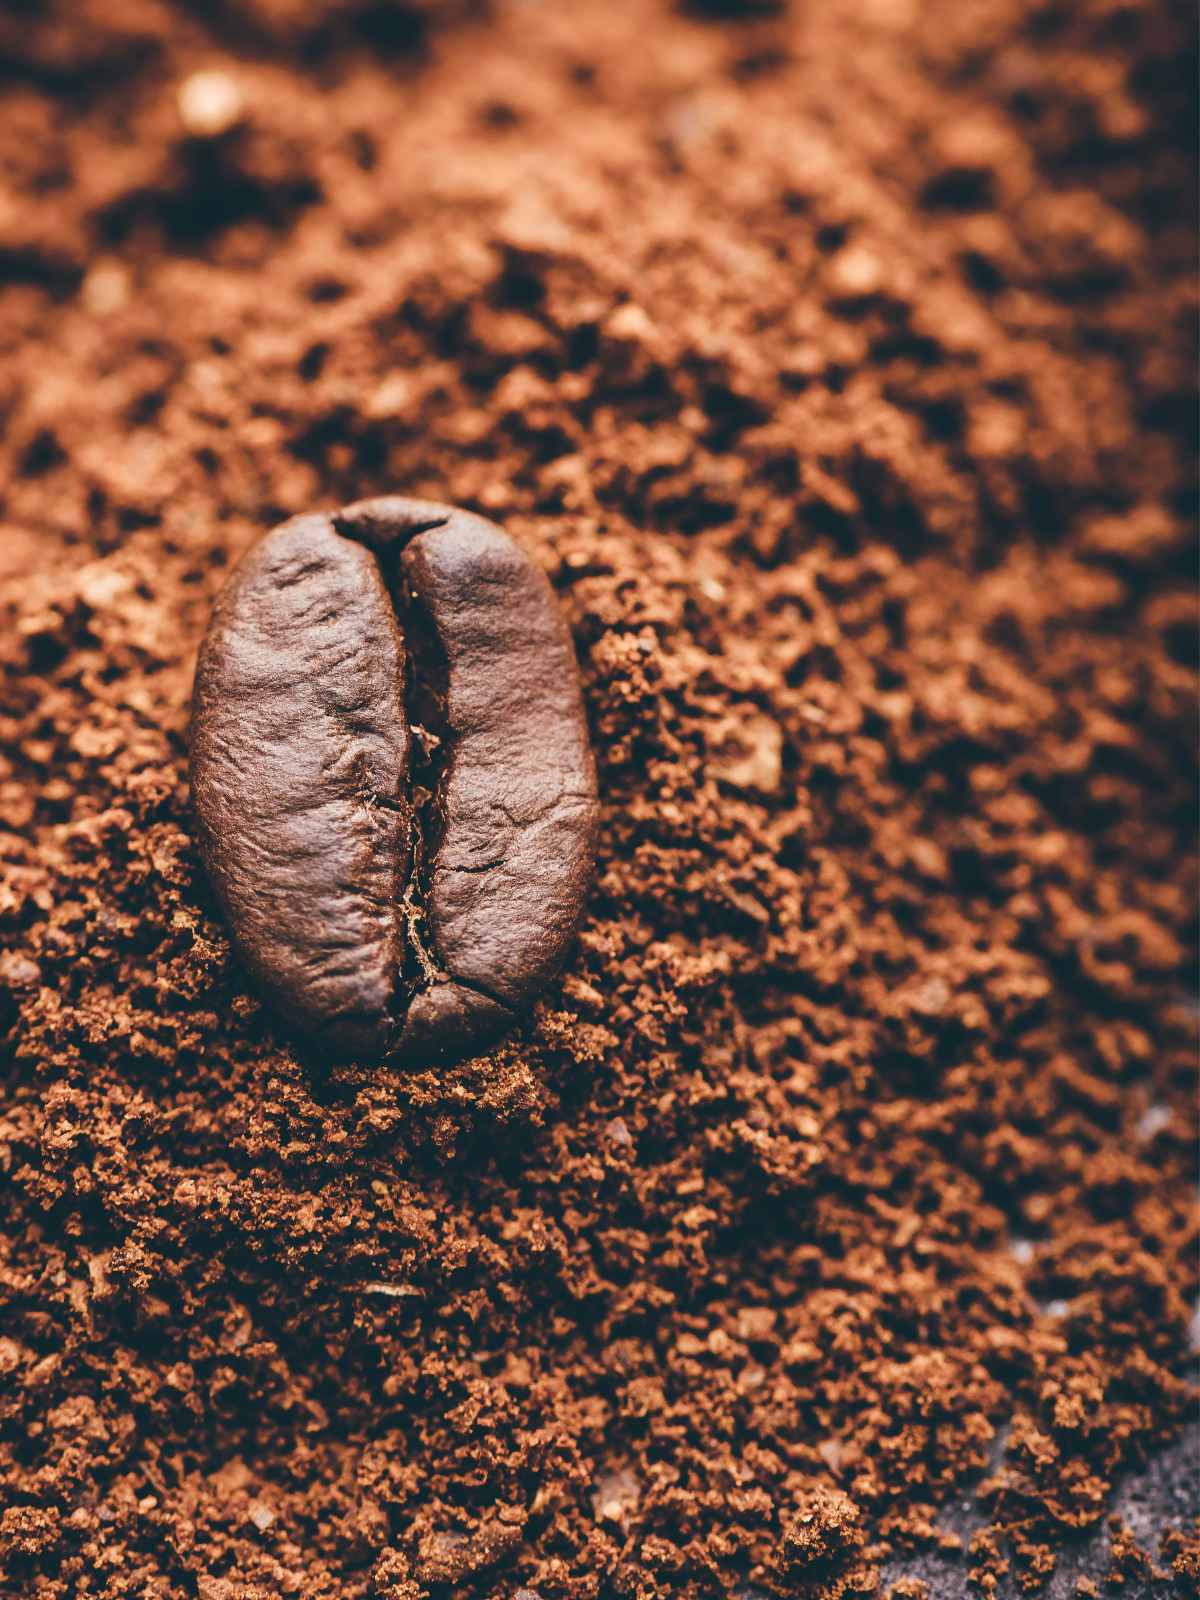 how to use coffee grounds in the garden